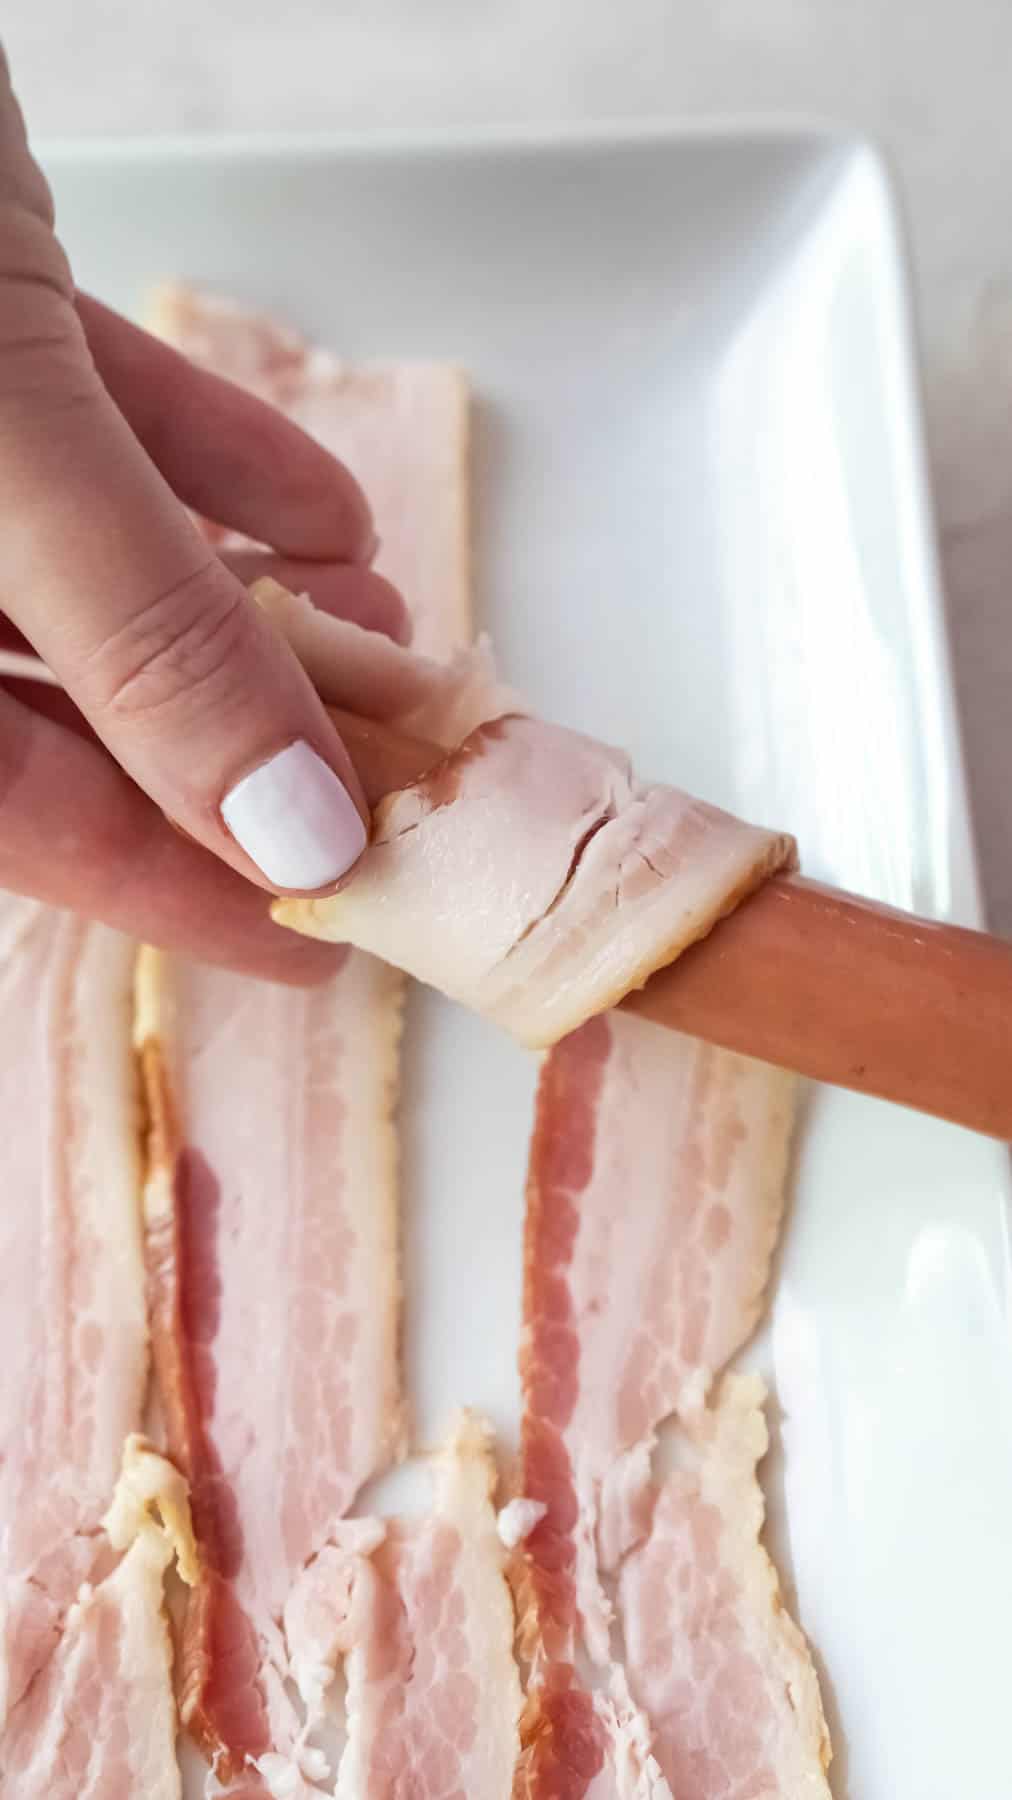 A hand wrapping a piece of bacon around a hot dog.